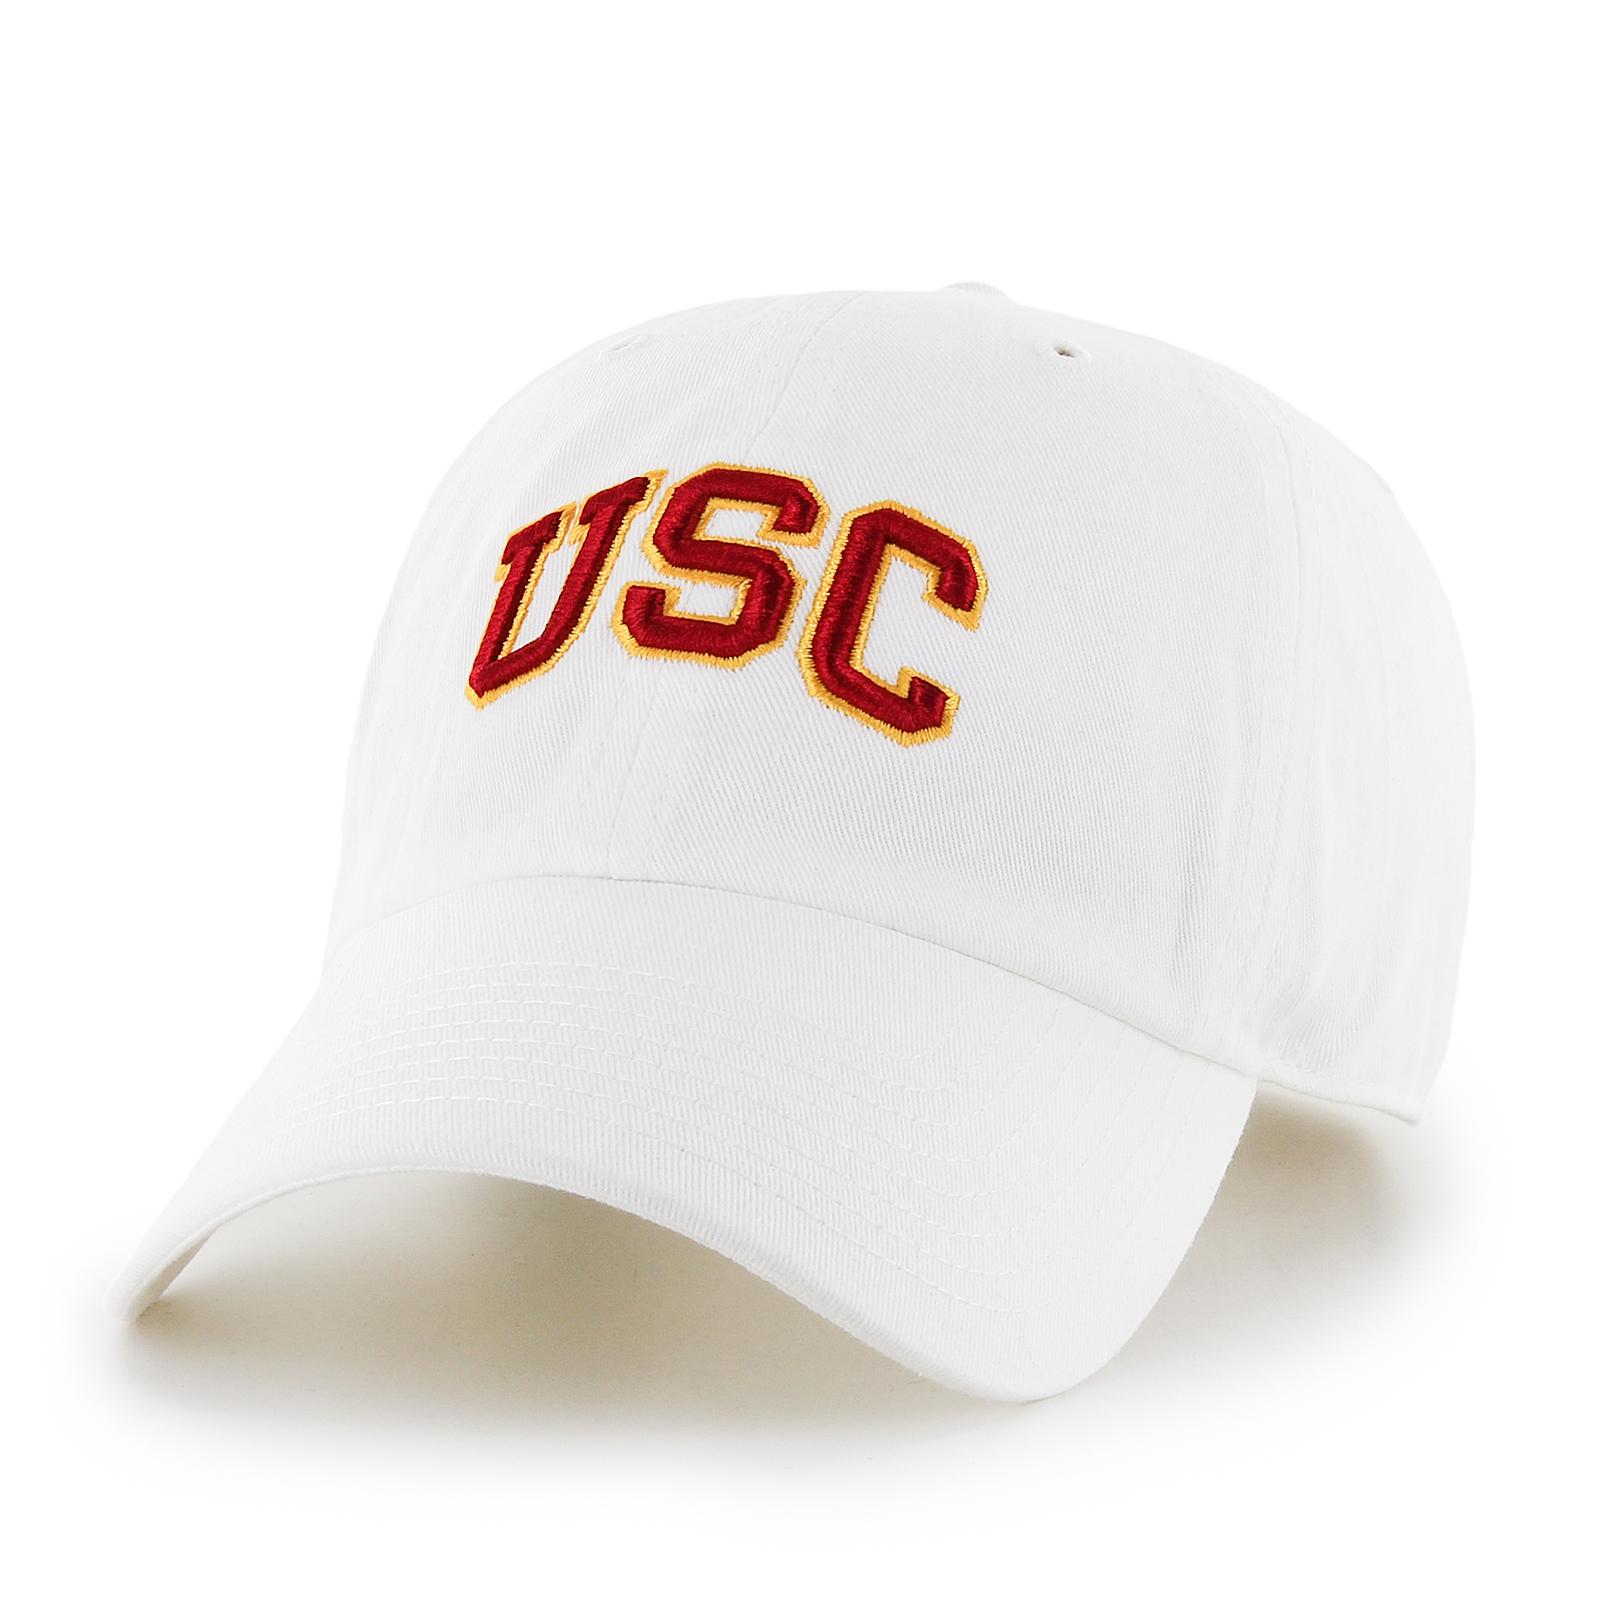 USC Arch Mens Clean Up Hat image11